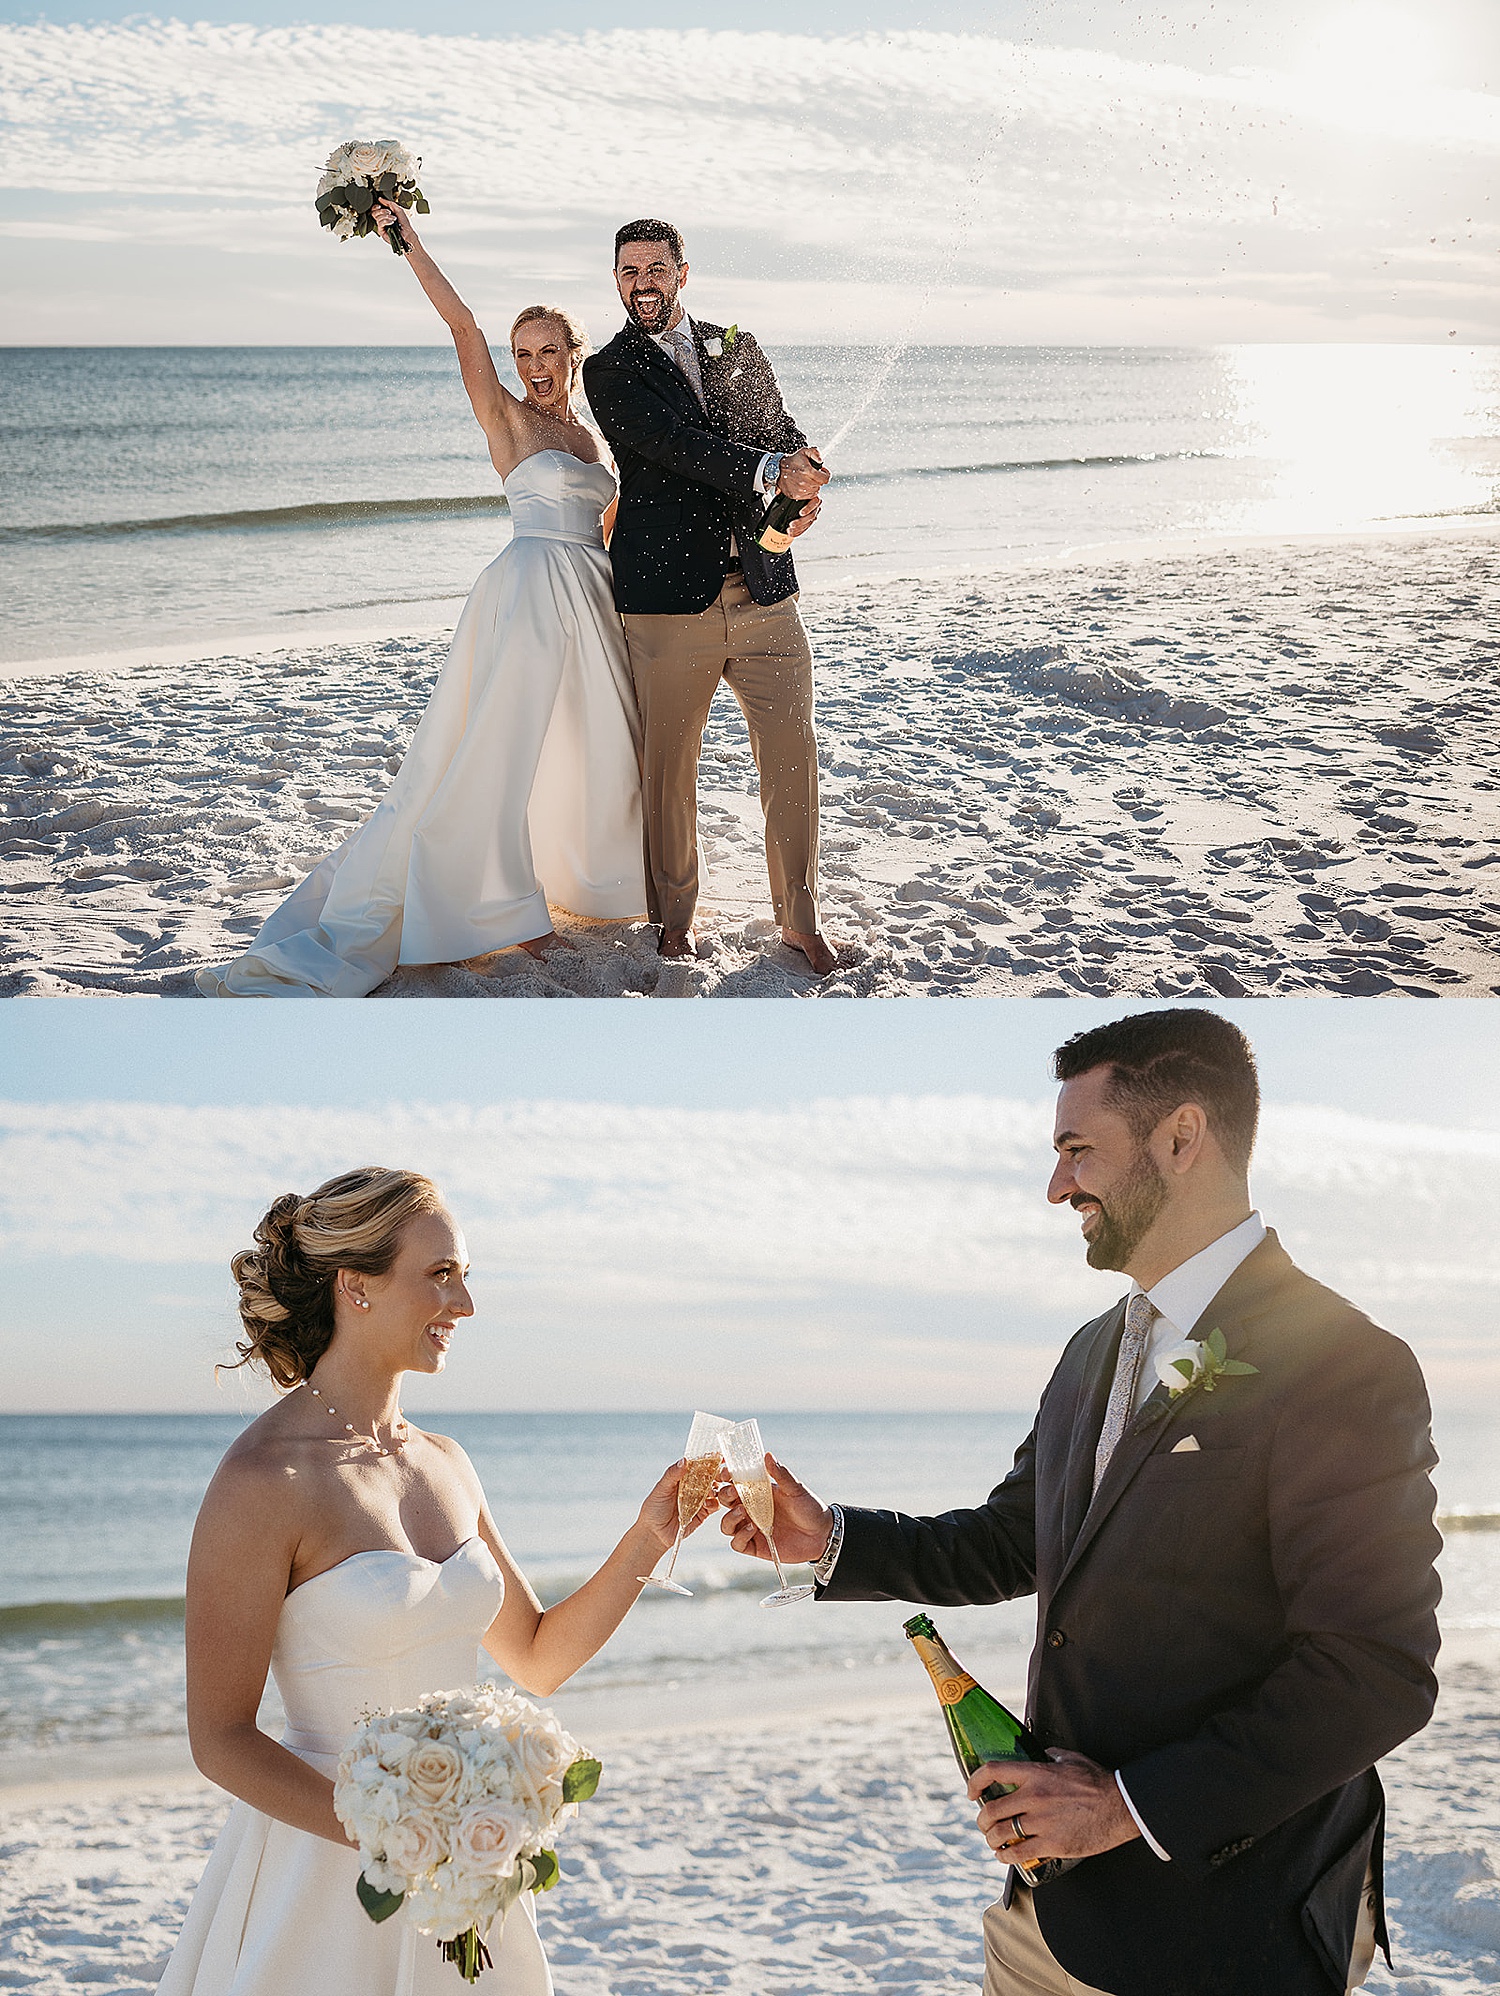 Newly married couple pops bottle of champagne in Destin Florida after Destin micro-wedding